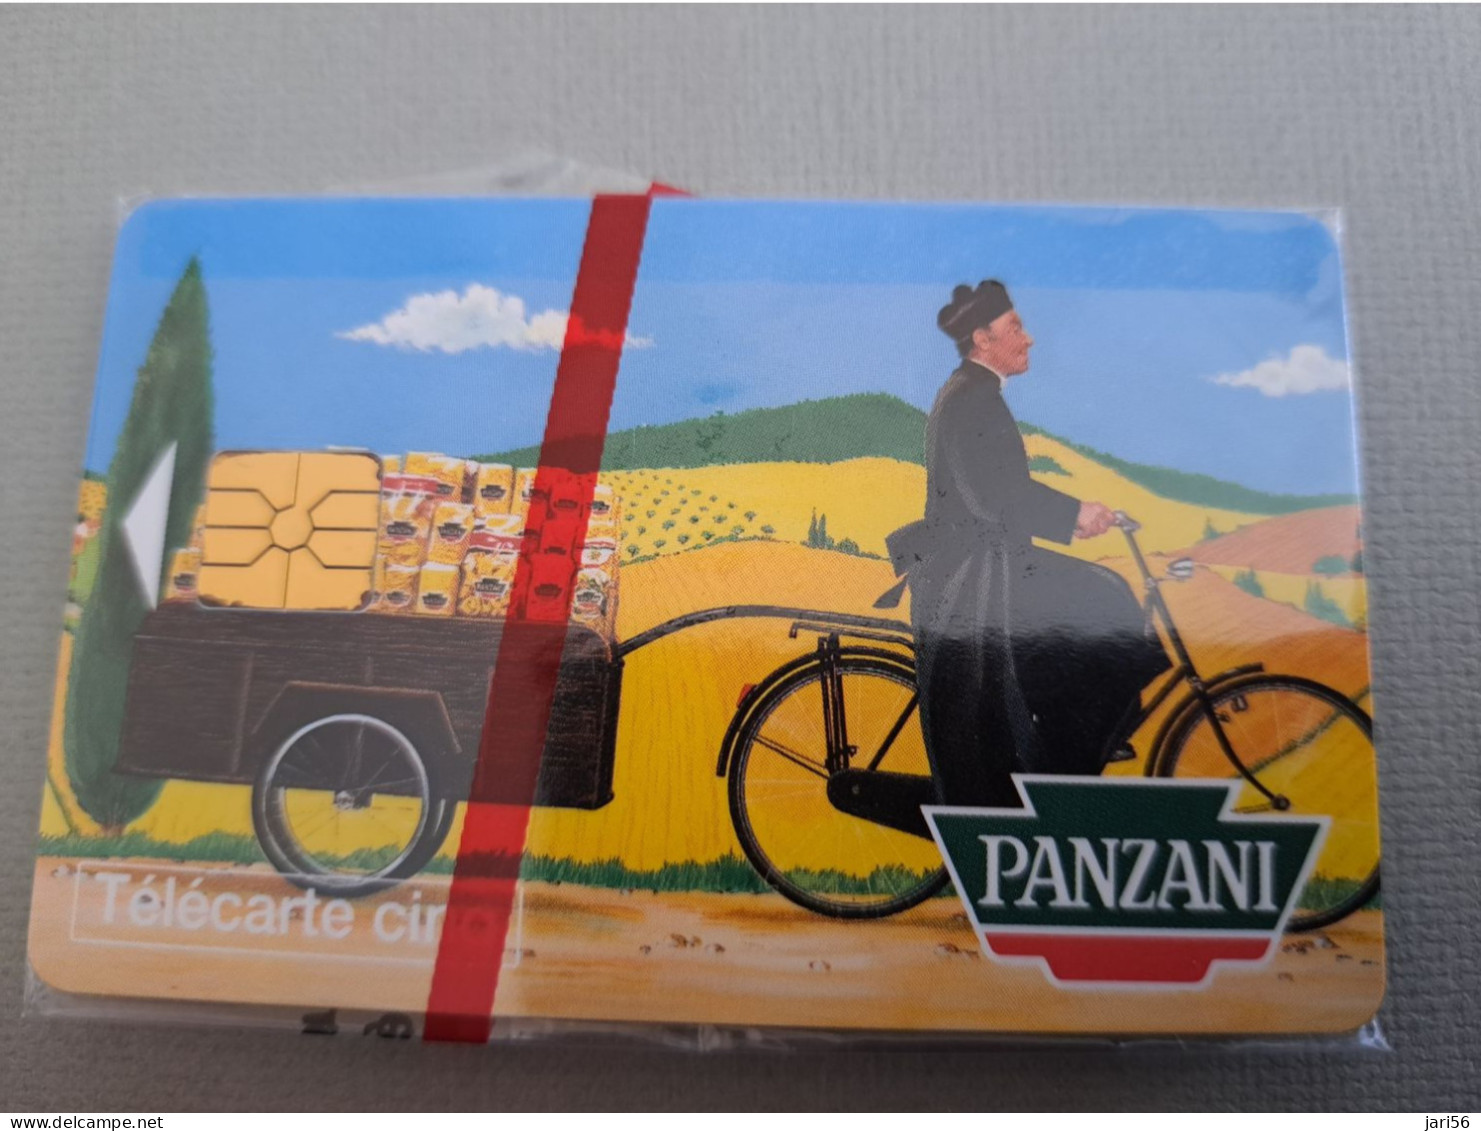 FRANCE/FRANKRIJK   CHIPCARD / PRIVE/ TELECARTE CINQ/ PANZANI/BYCICLE   MINT IN WRAPPER     WITH CHIP     ** 13633** - Prepaid: Mobicartes